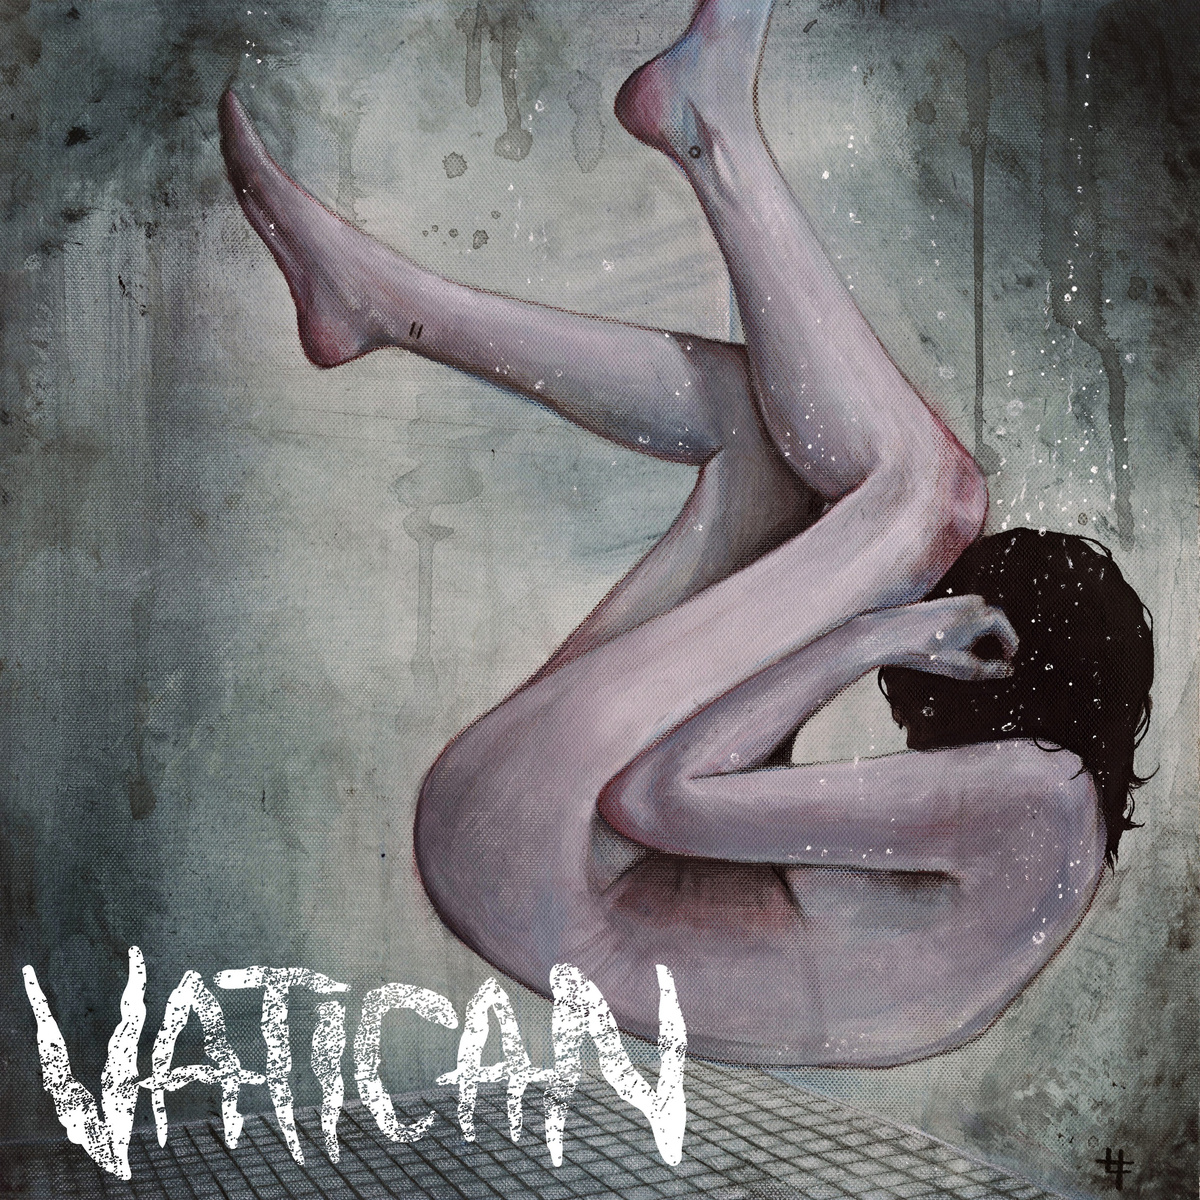 Vatican - Drowning The Apathy Inside (2015)